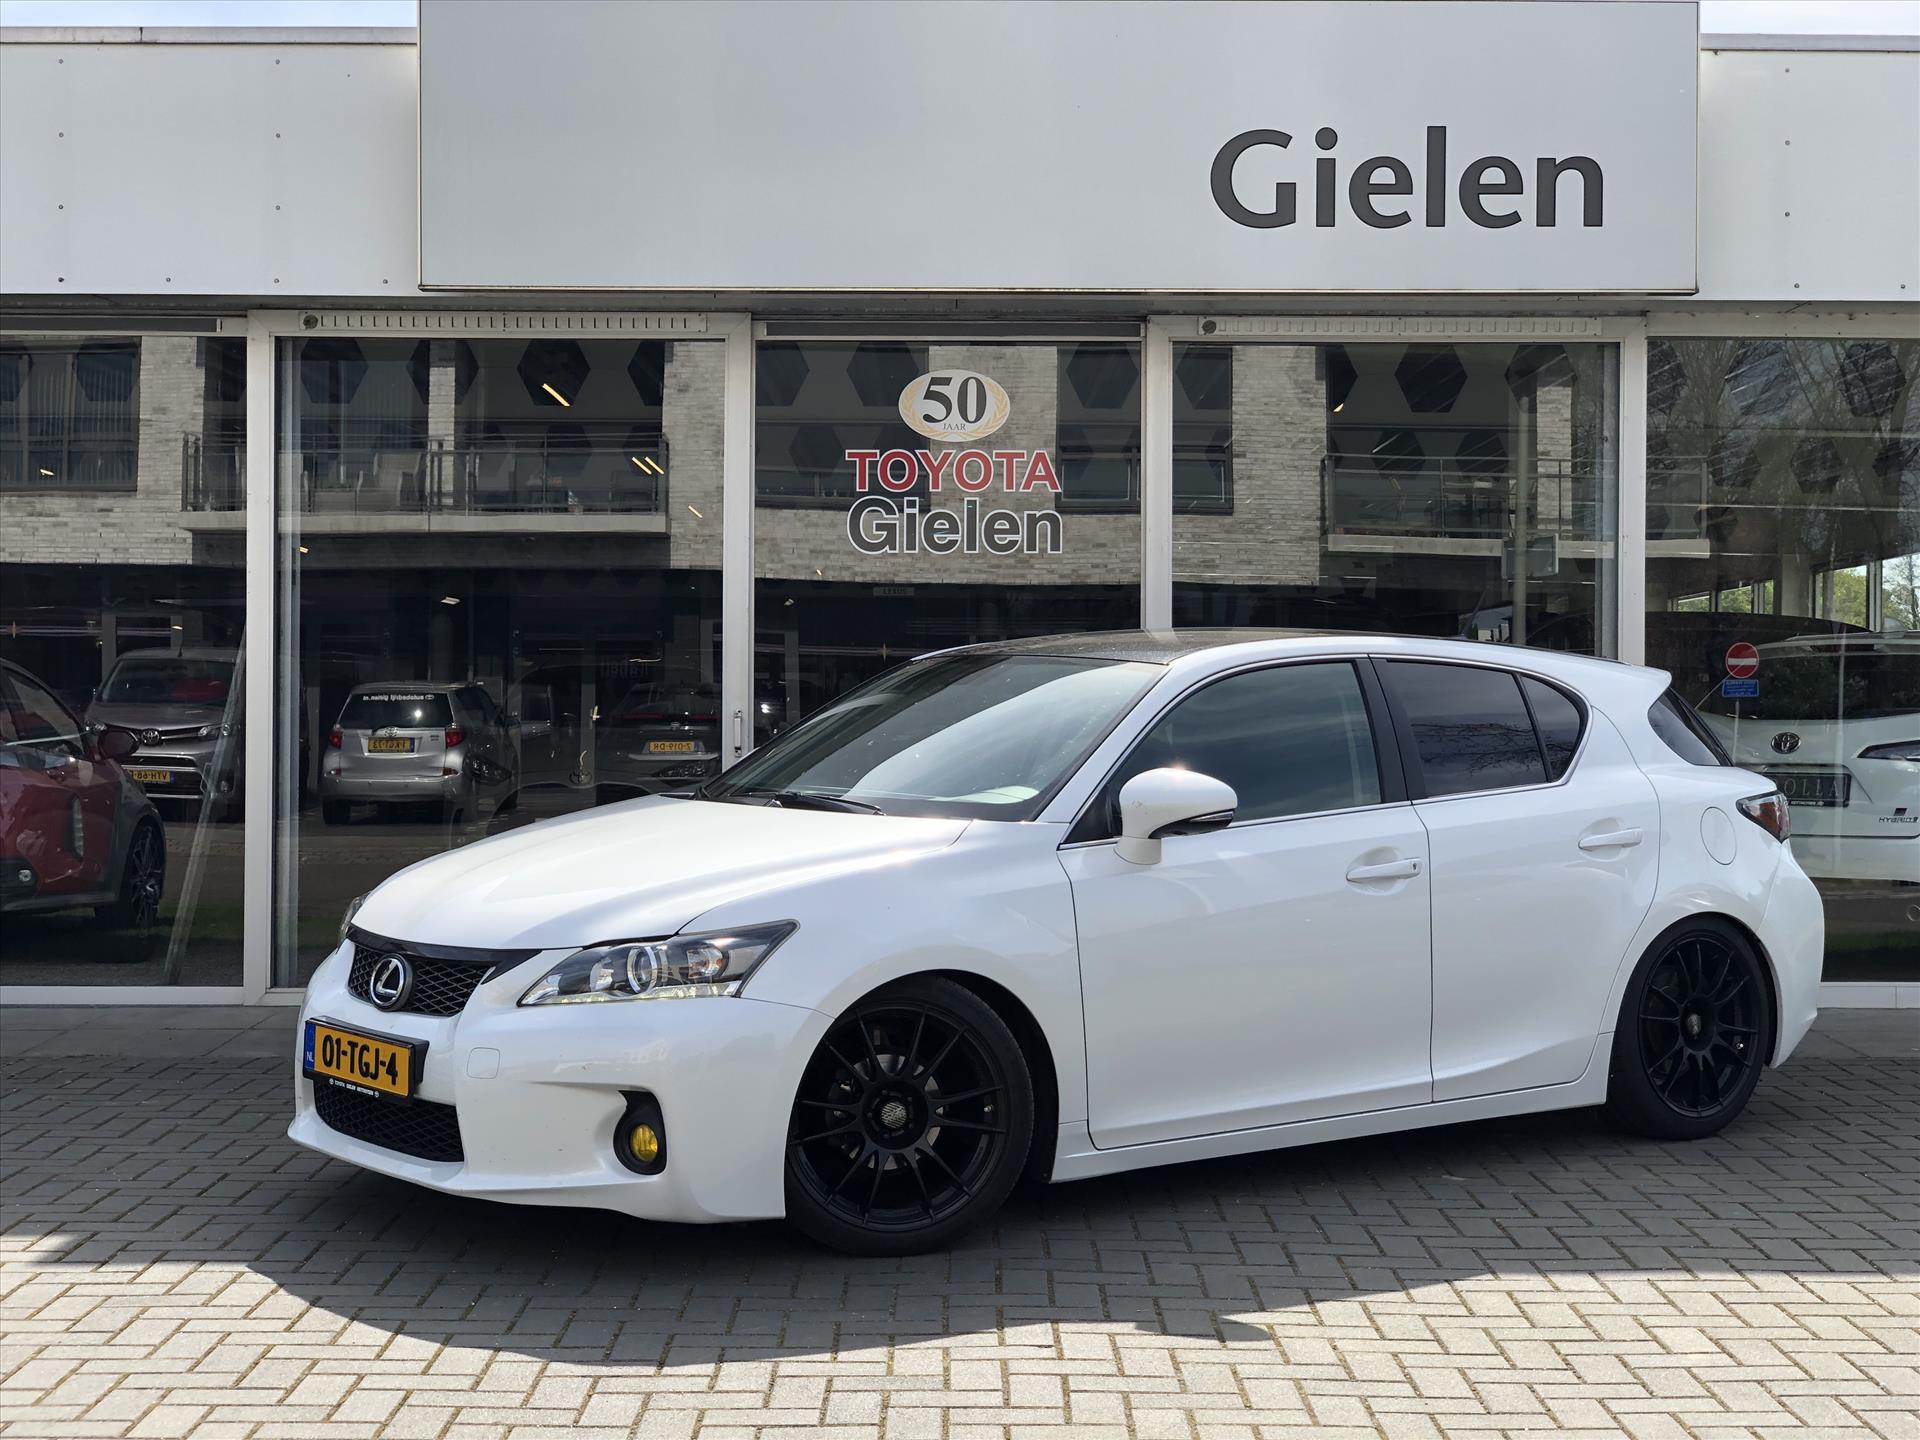 Lexus Ct 200h Business Line Pro F Sport Grill | Parkeercamera, Keyless, Cruise control, 18 inch, Privacy Glass, Zeer compleet! bij viaBOVAG.nl